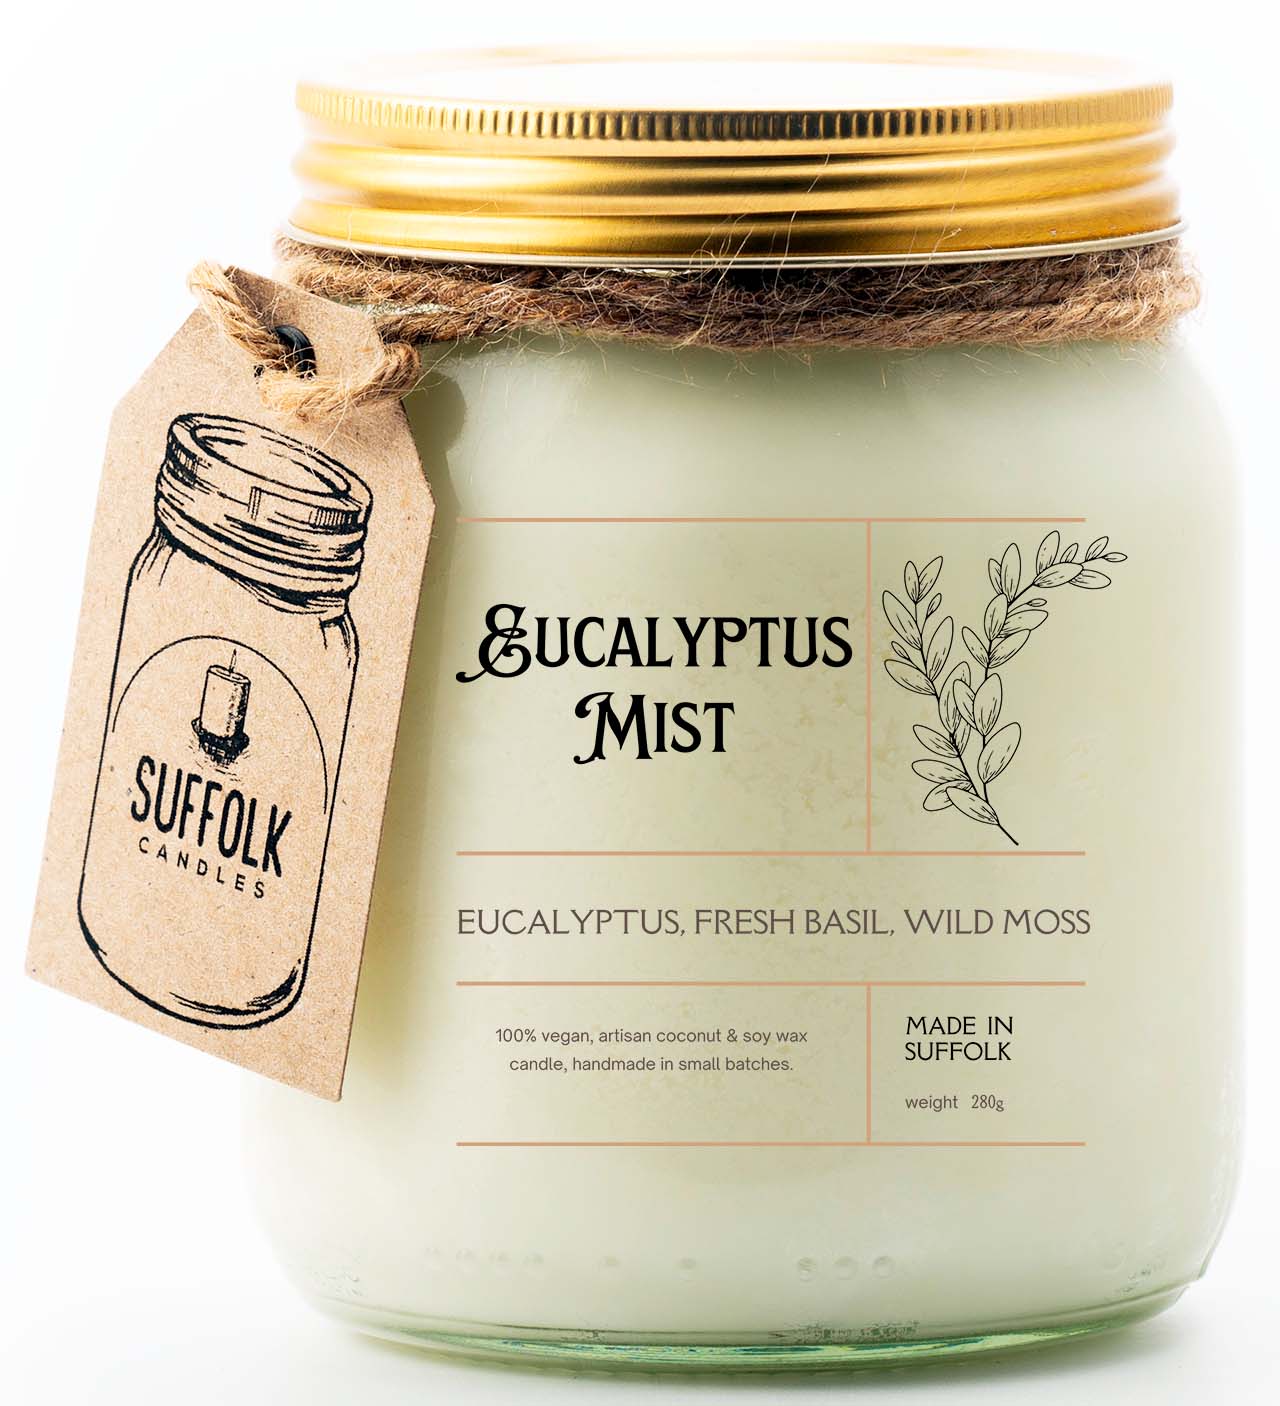 Eucalyptus Mist Scented Candle Jar | Spa Scented Candle, Wild Moss, Fresh Basil